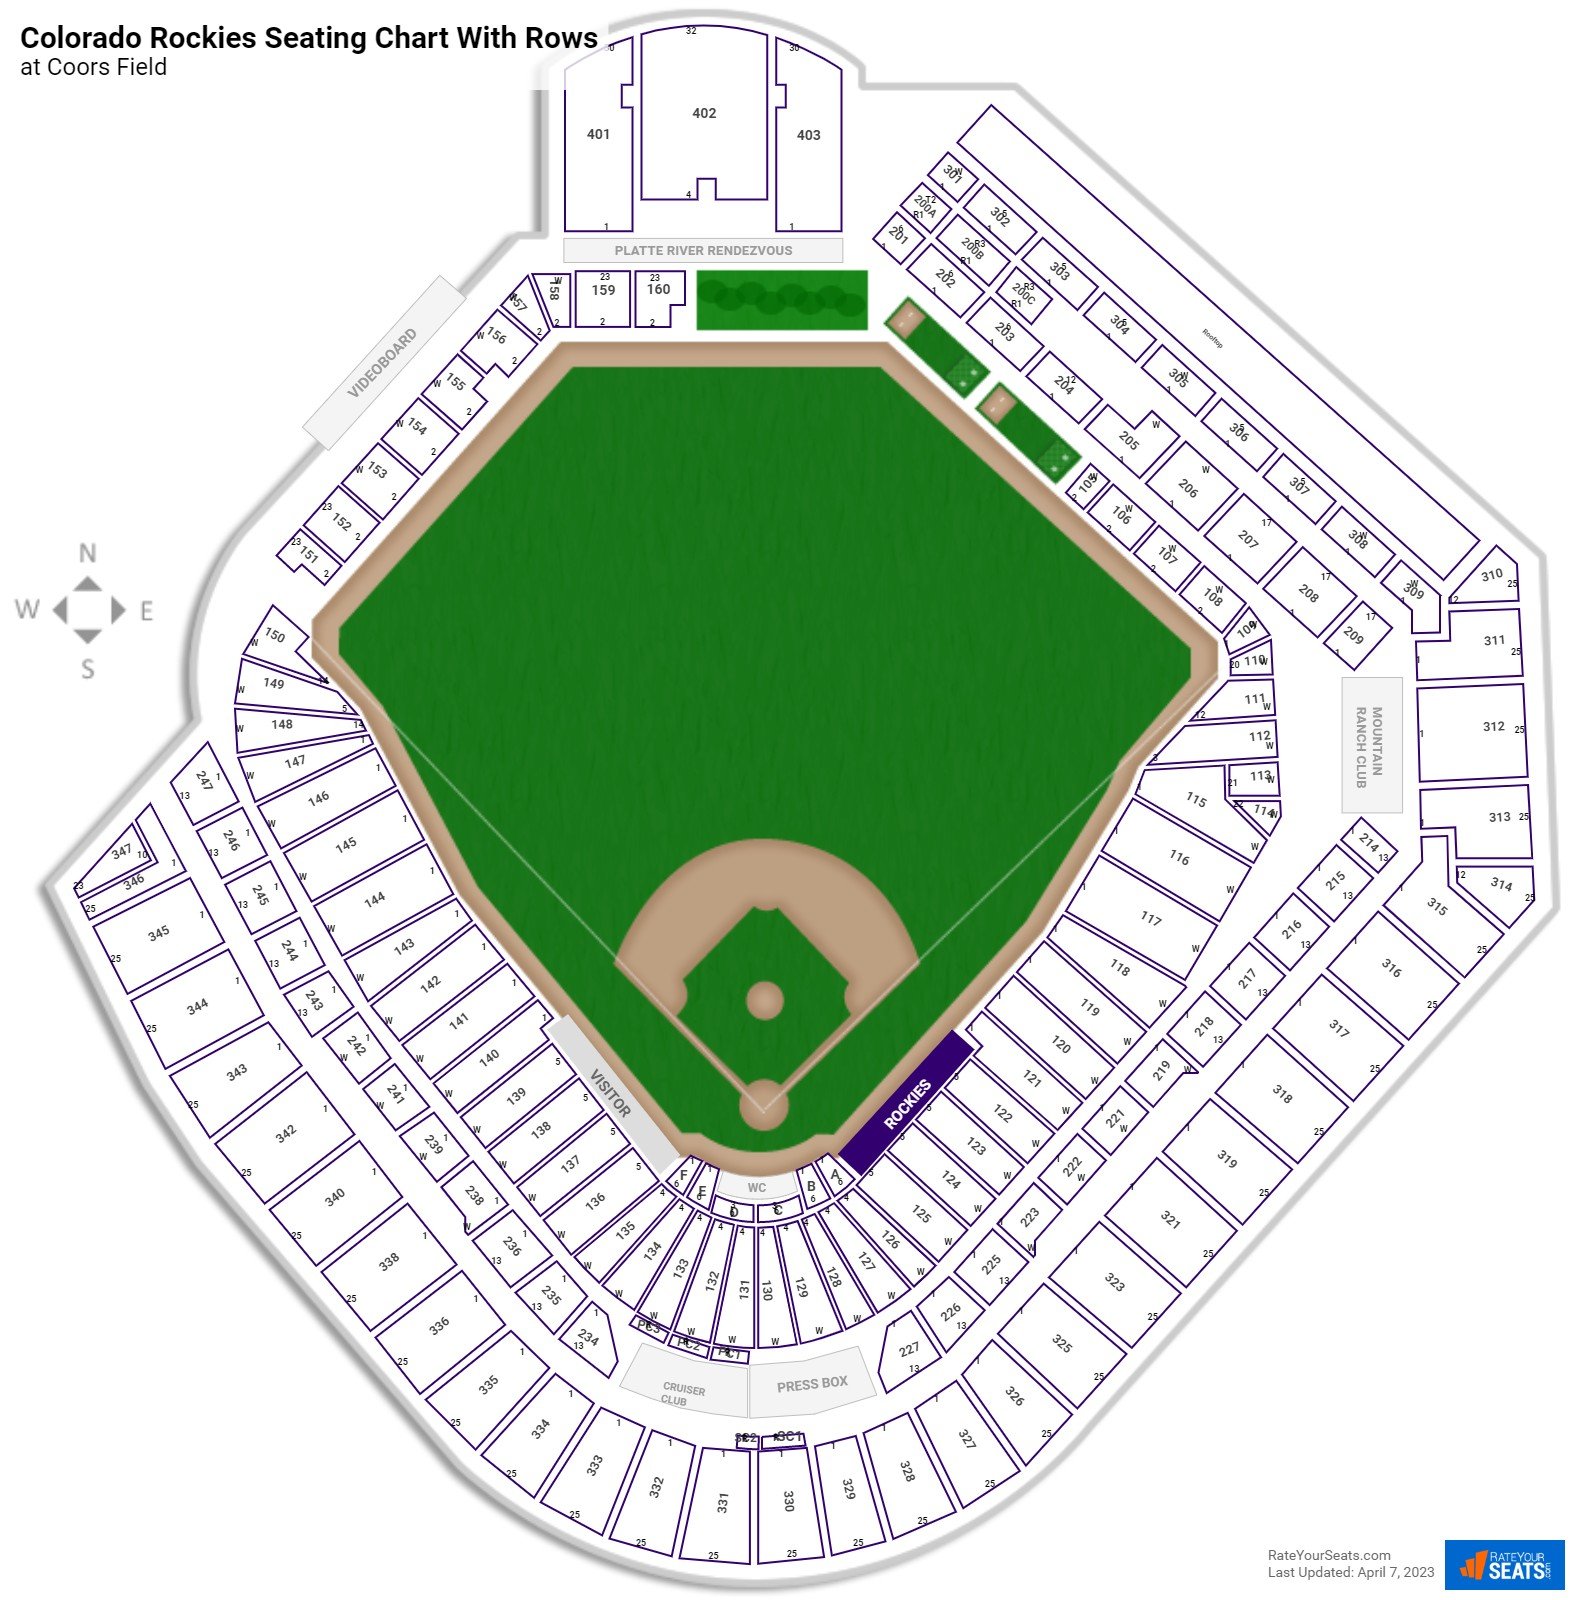 Colorado Rockies Seating Chart With Rows At Coors Field 